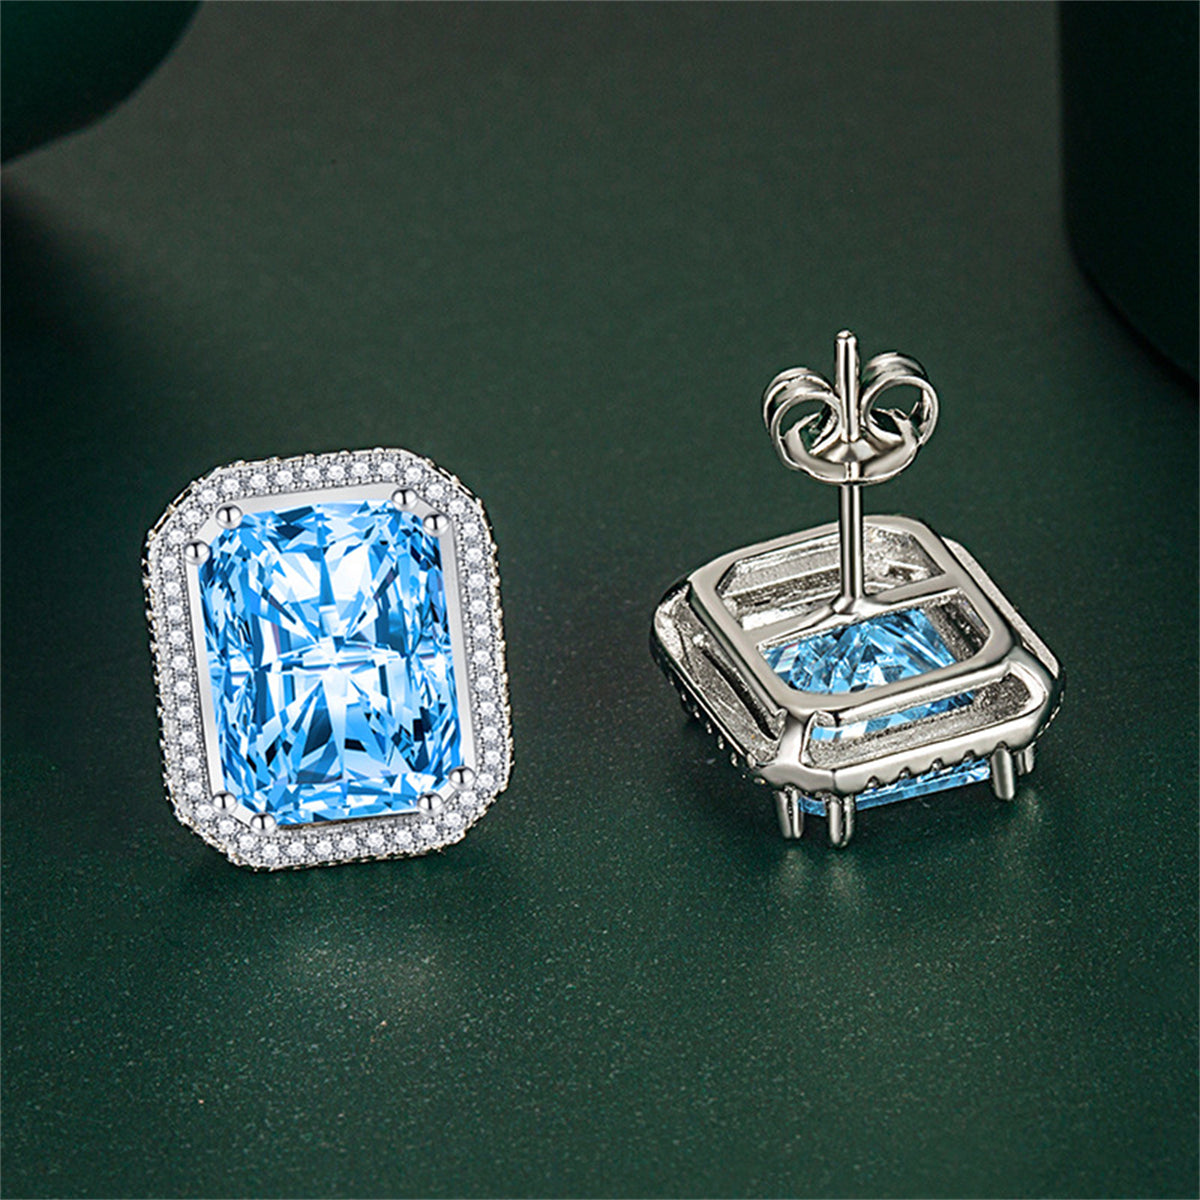 Blue Radiant Crystal & Cubic Zirconia Silver-Plated Halo Stud Earrings